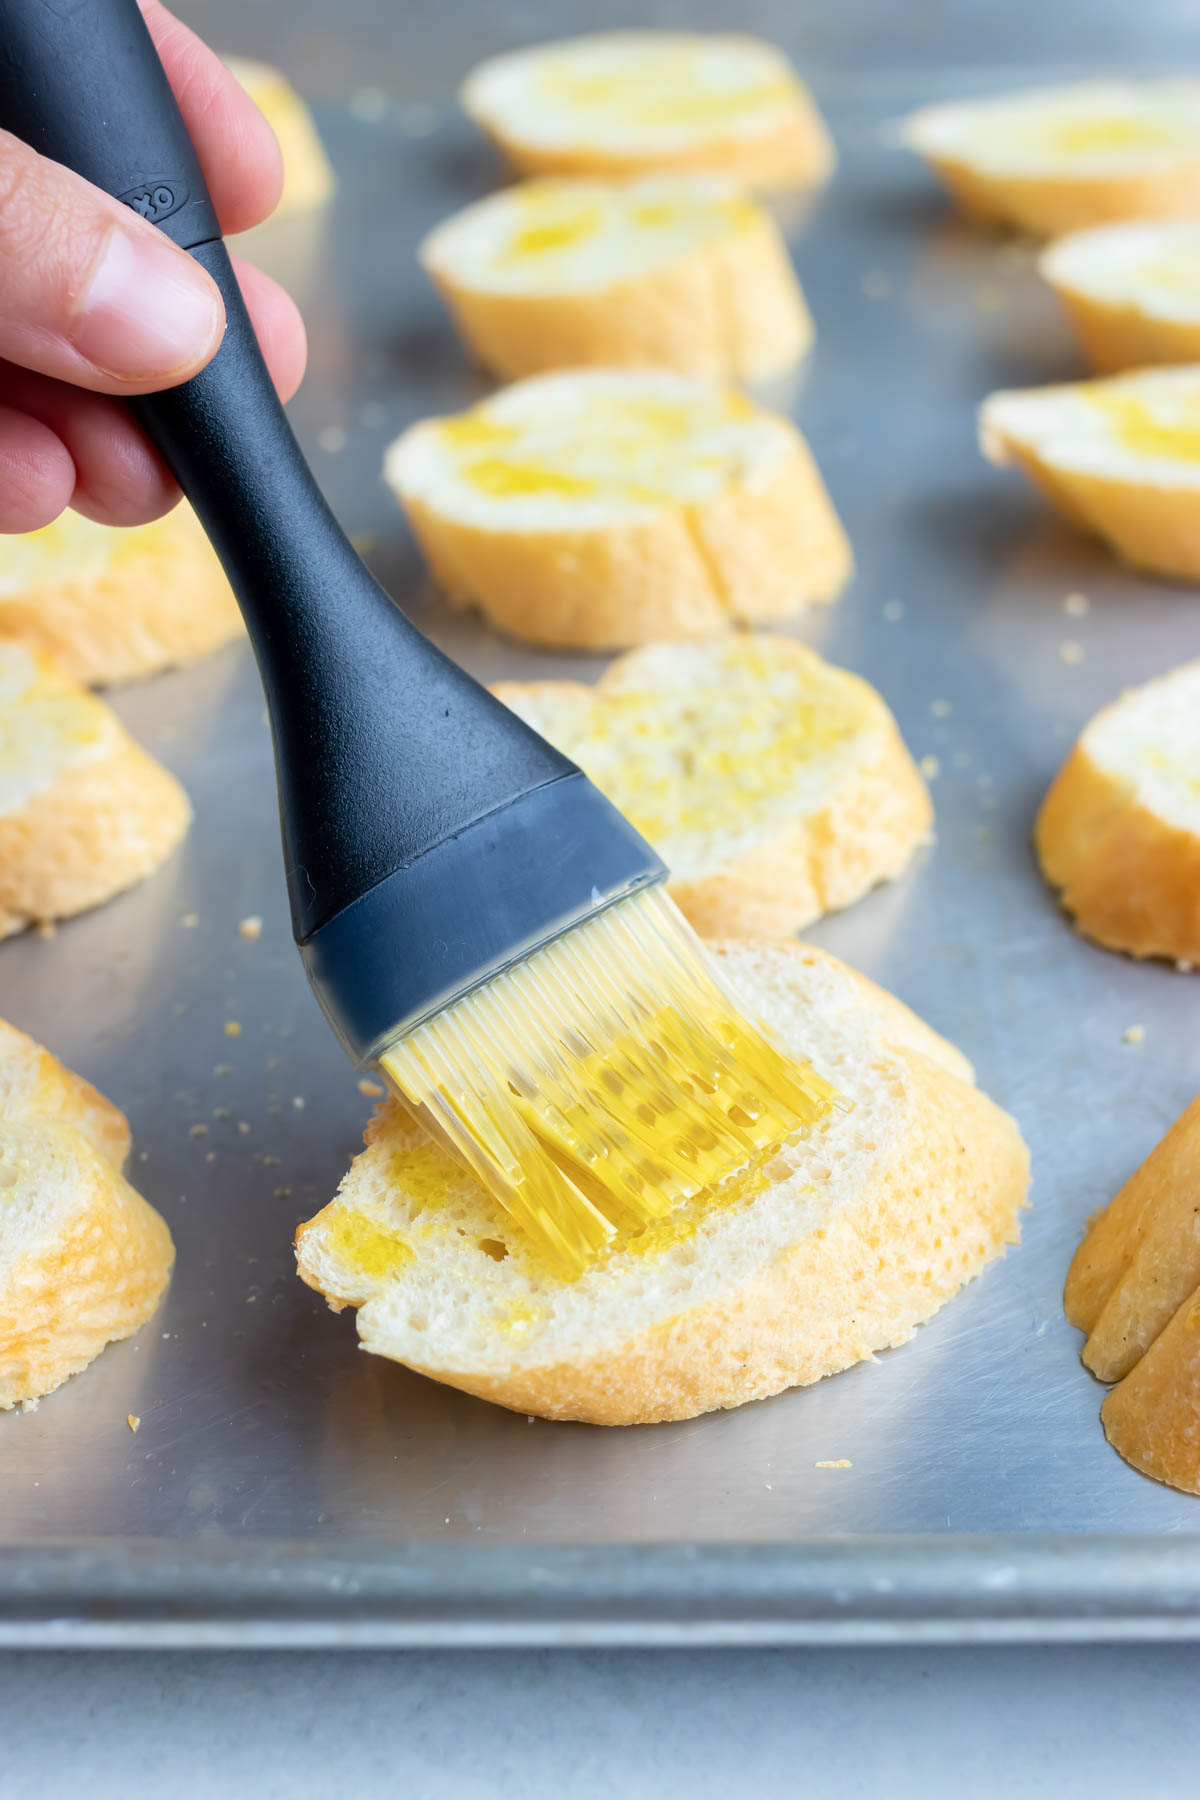 Brushing a piece of bread with oil.